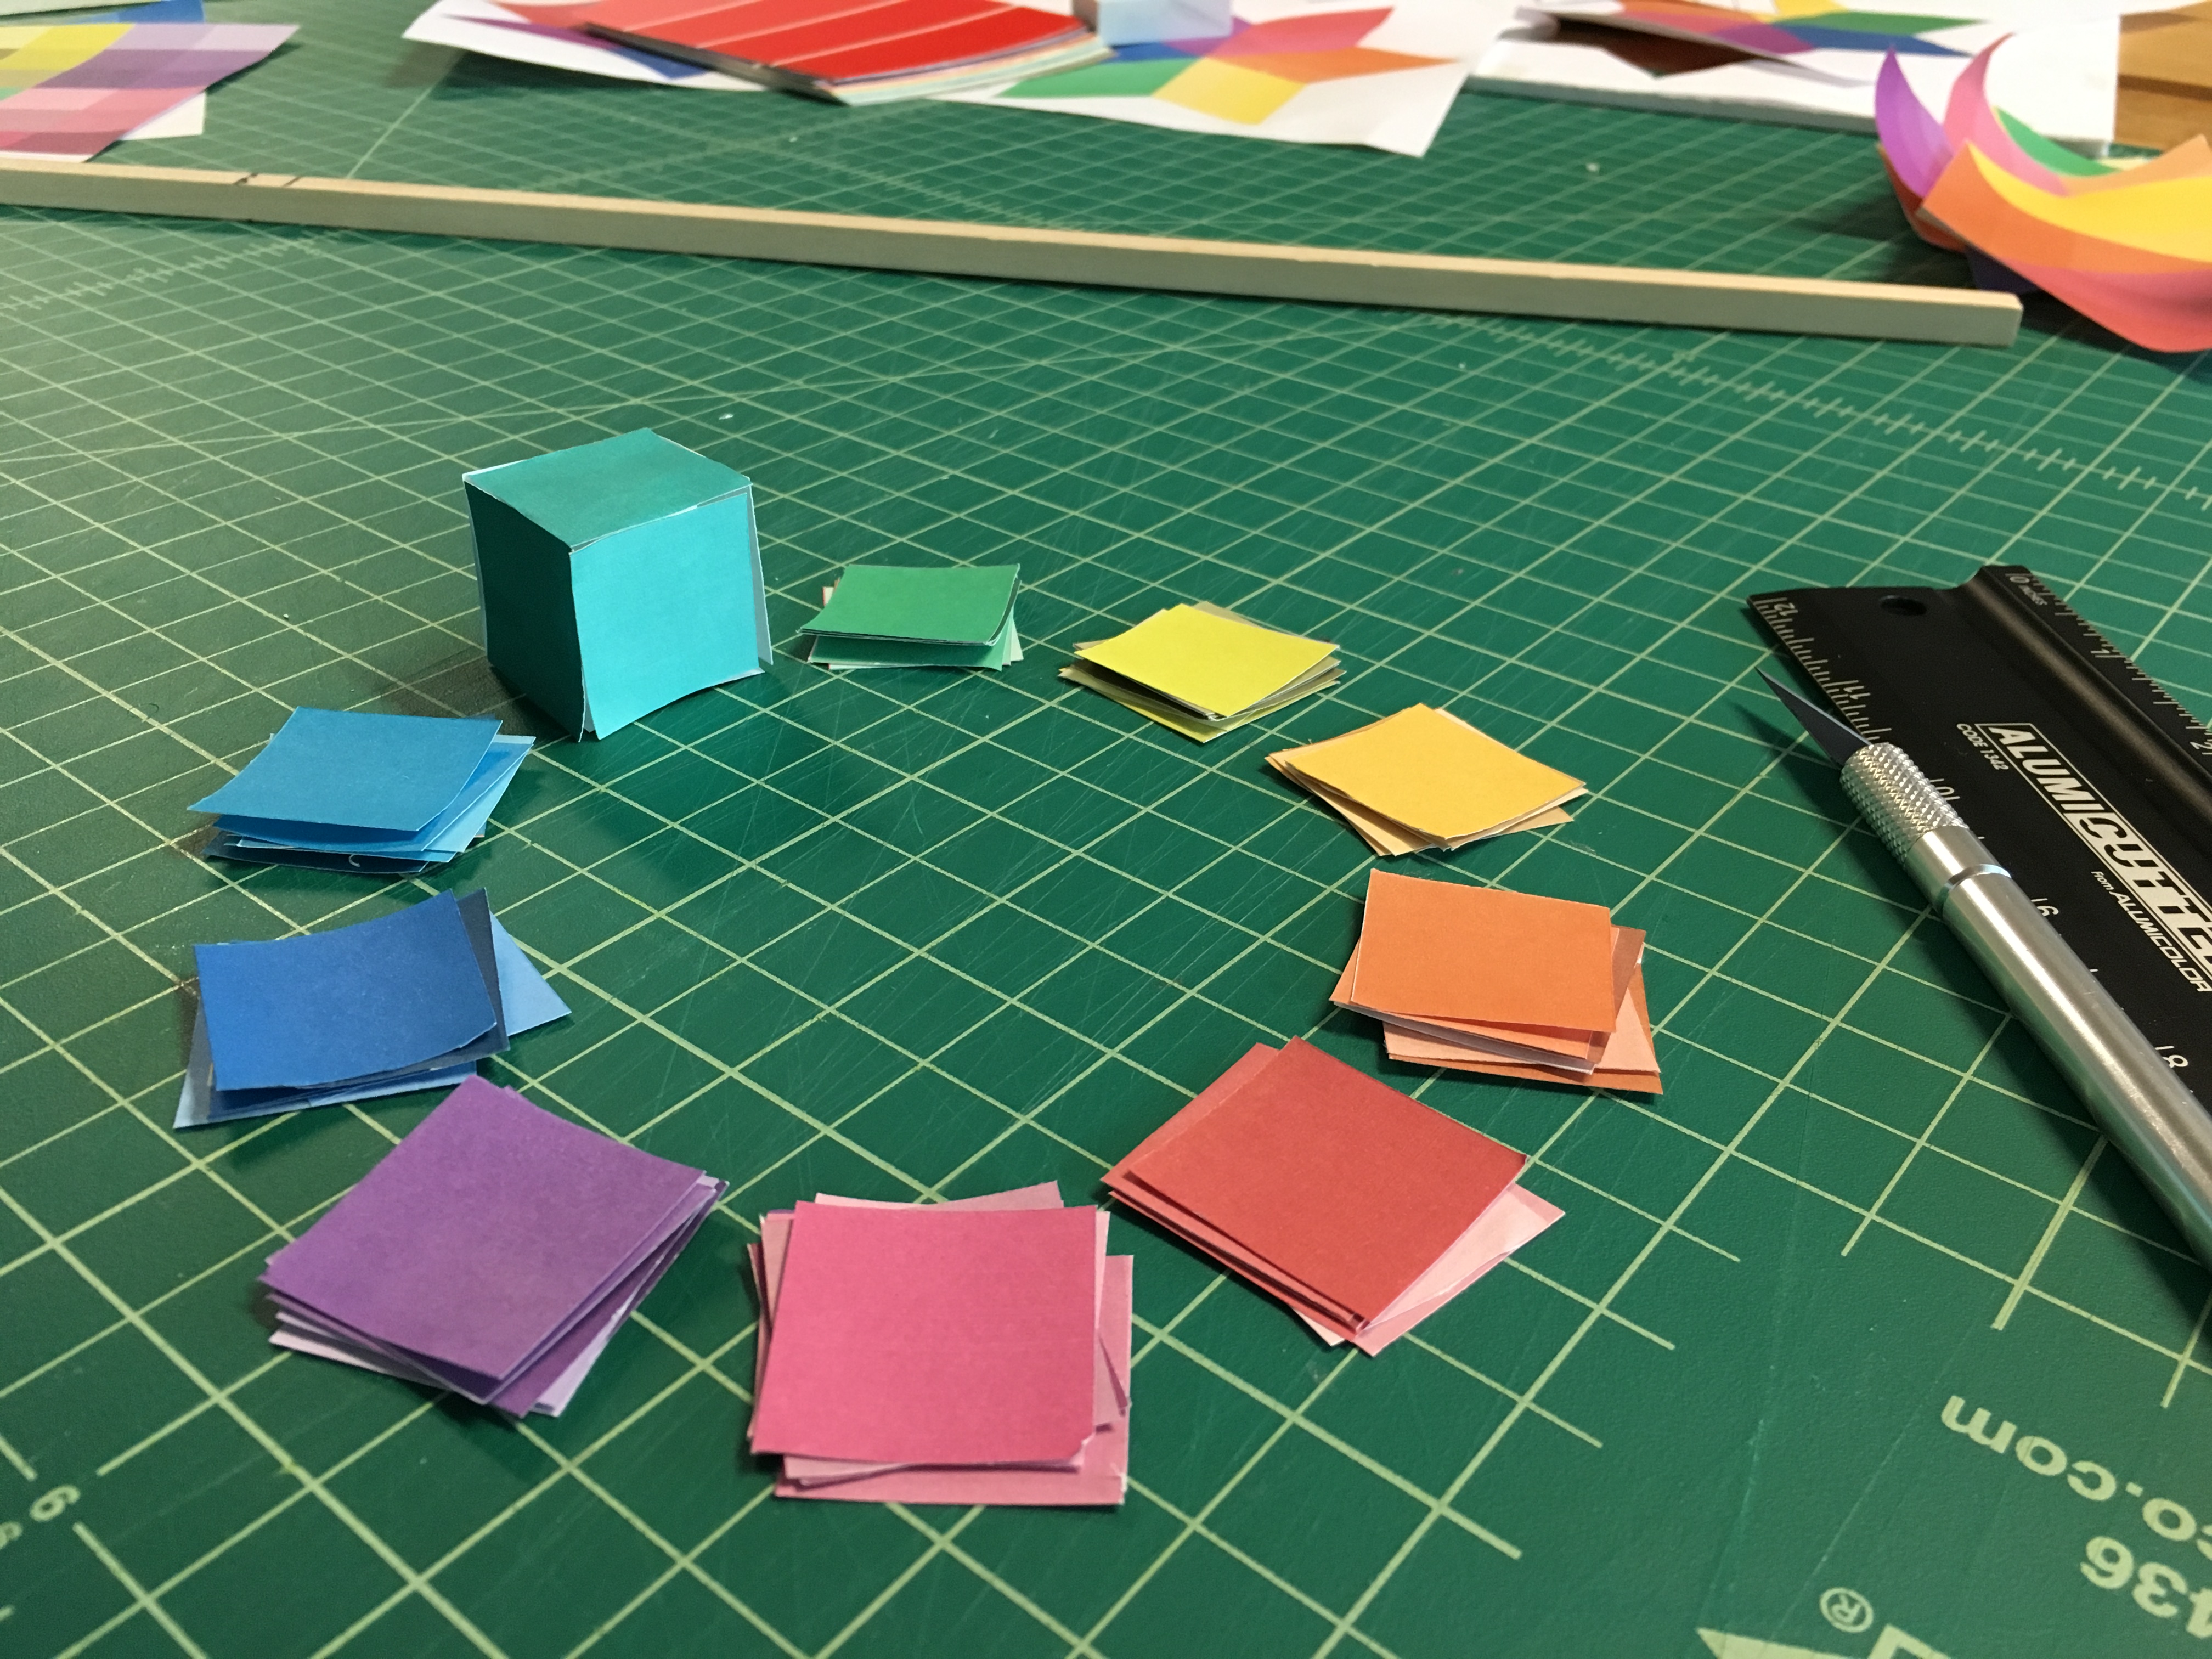 An early prototype of a color wheel made of dice, made of printed paper cut-outs glued together into cubes.